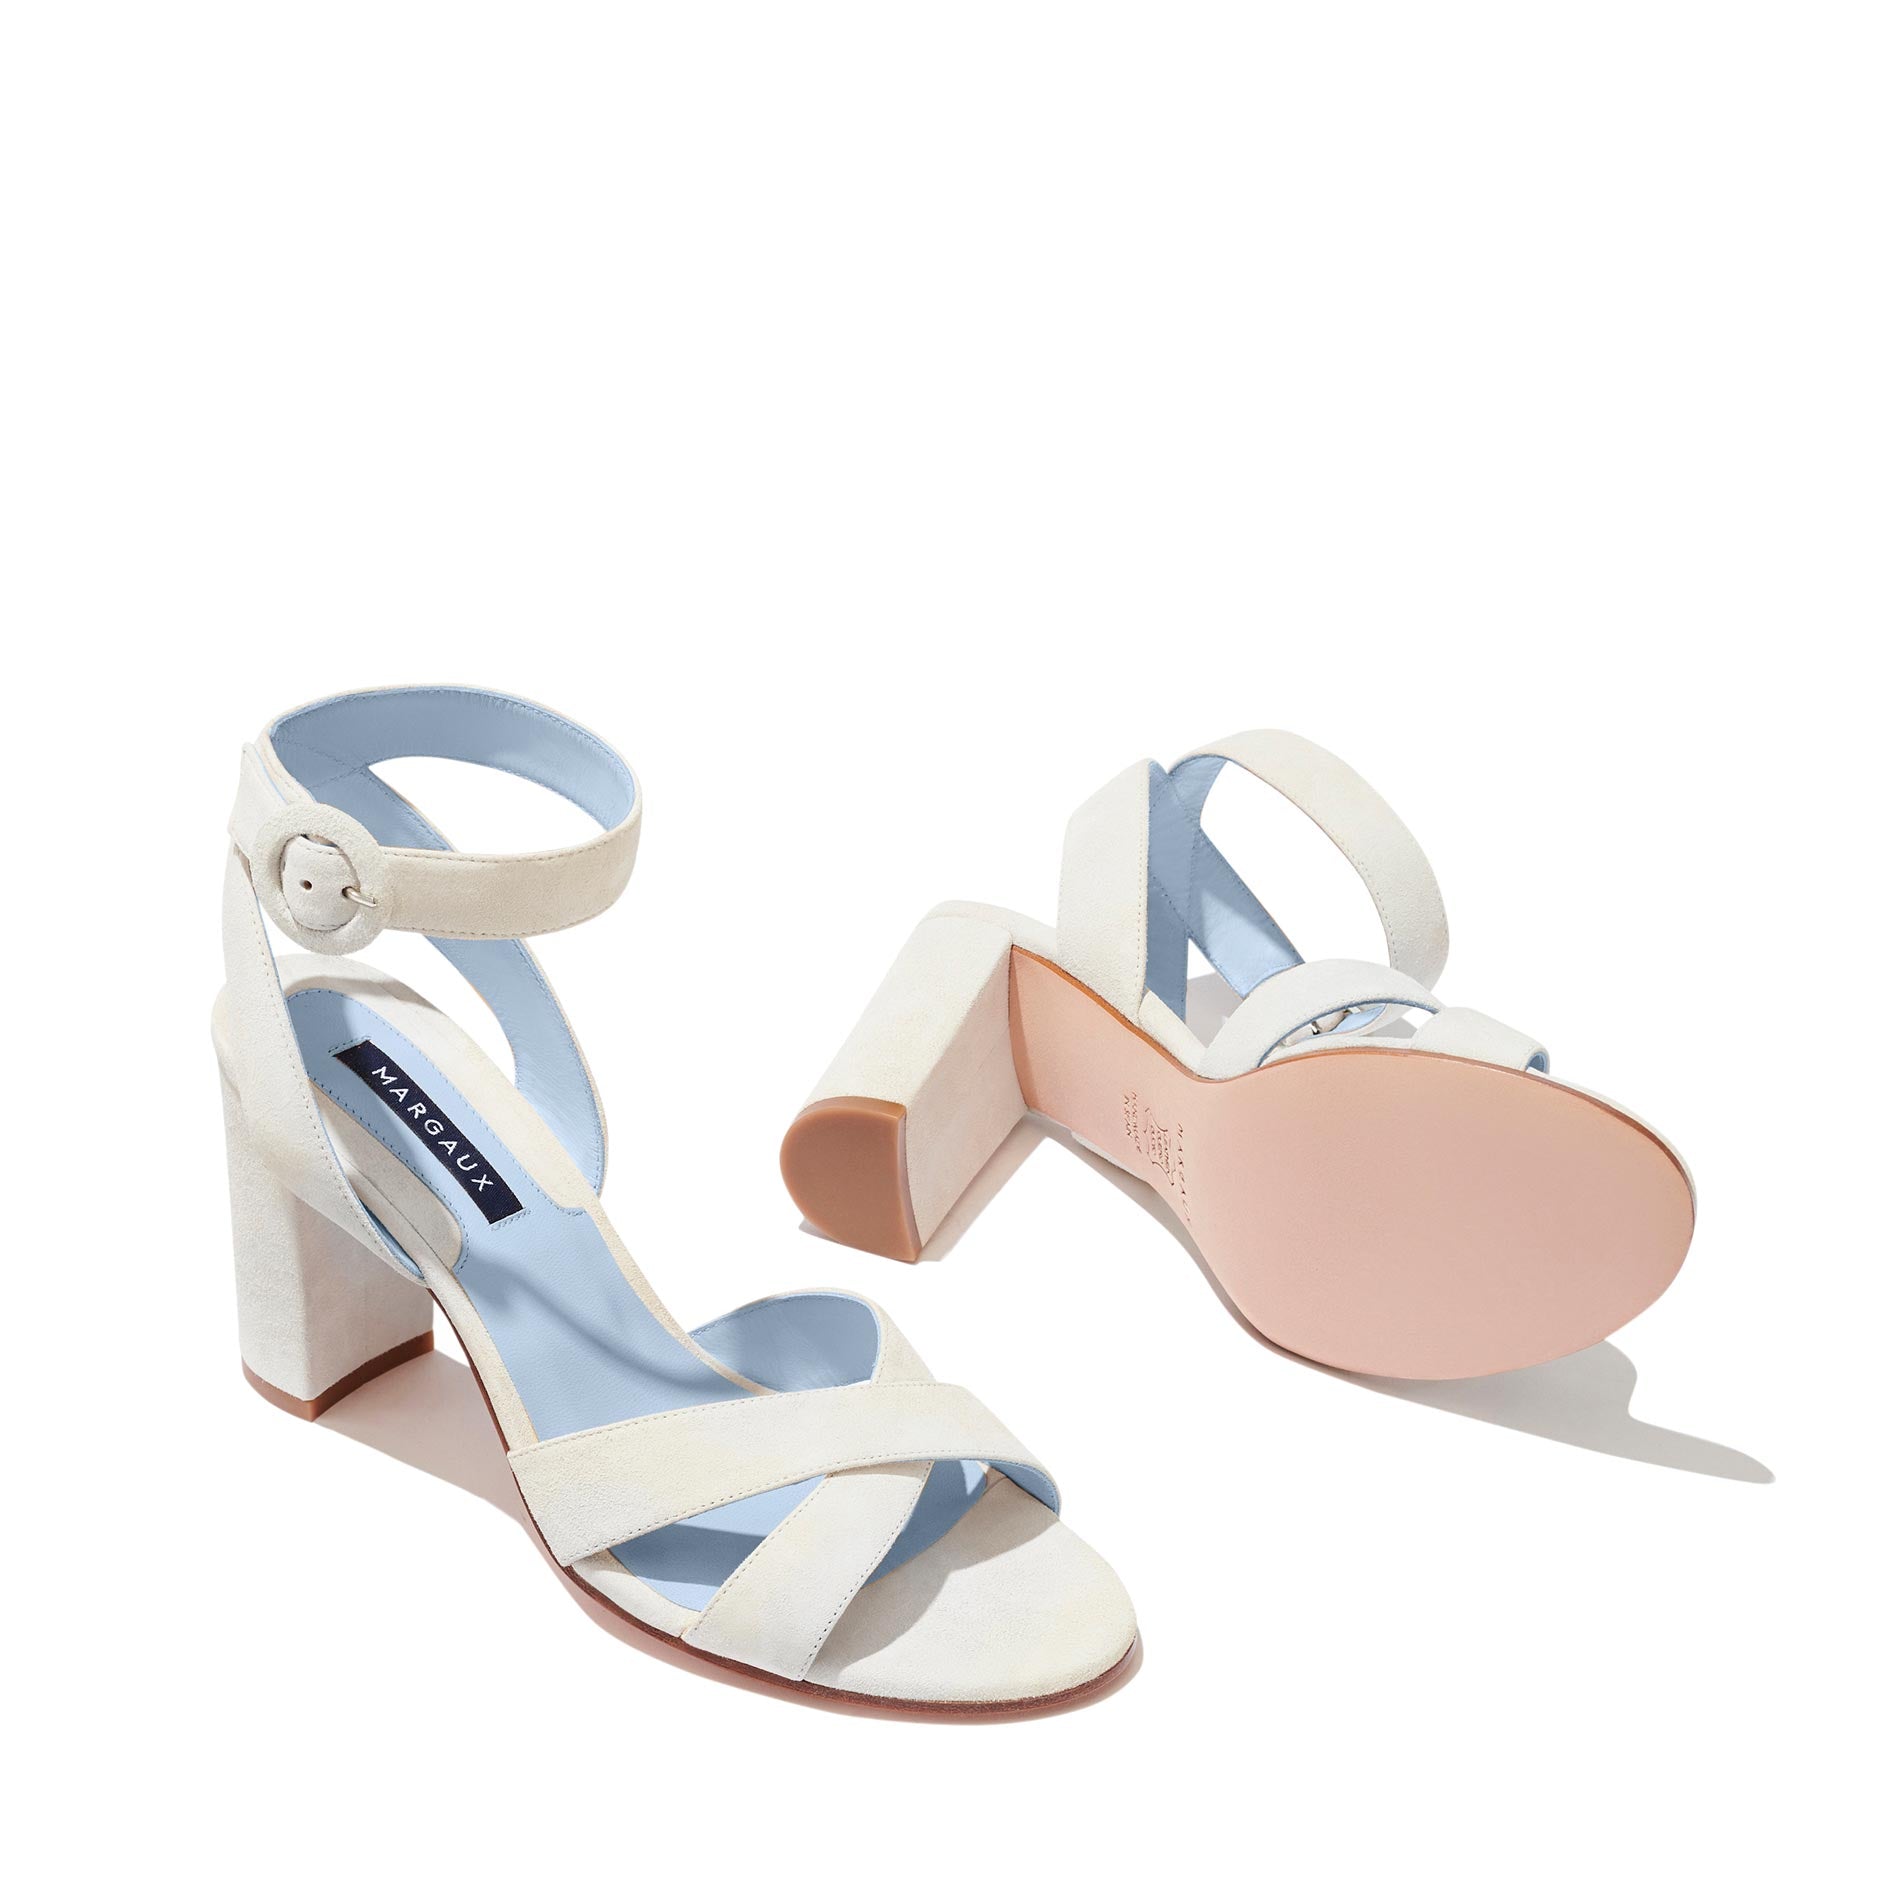 ivory - suede, blue